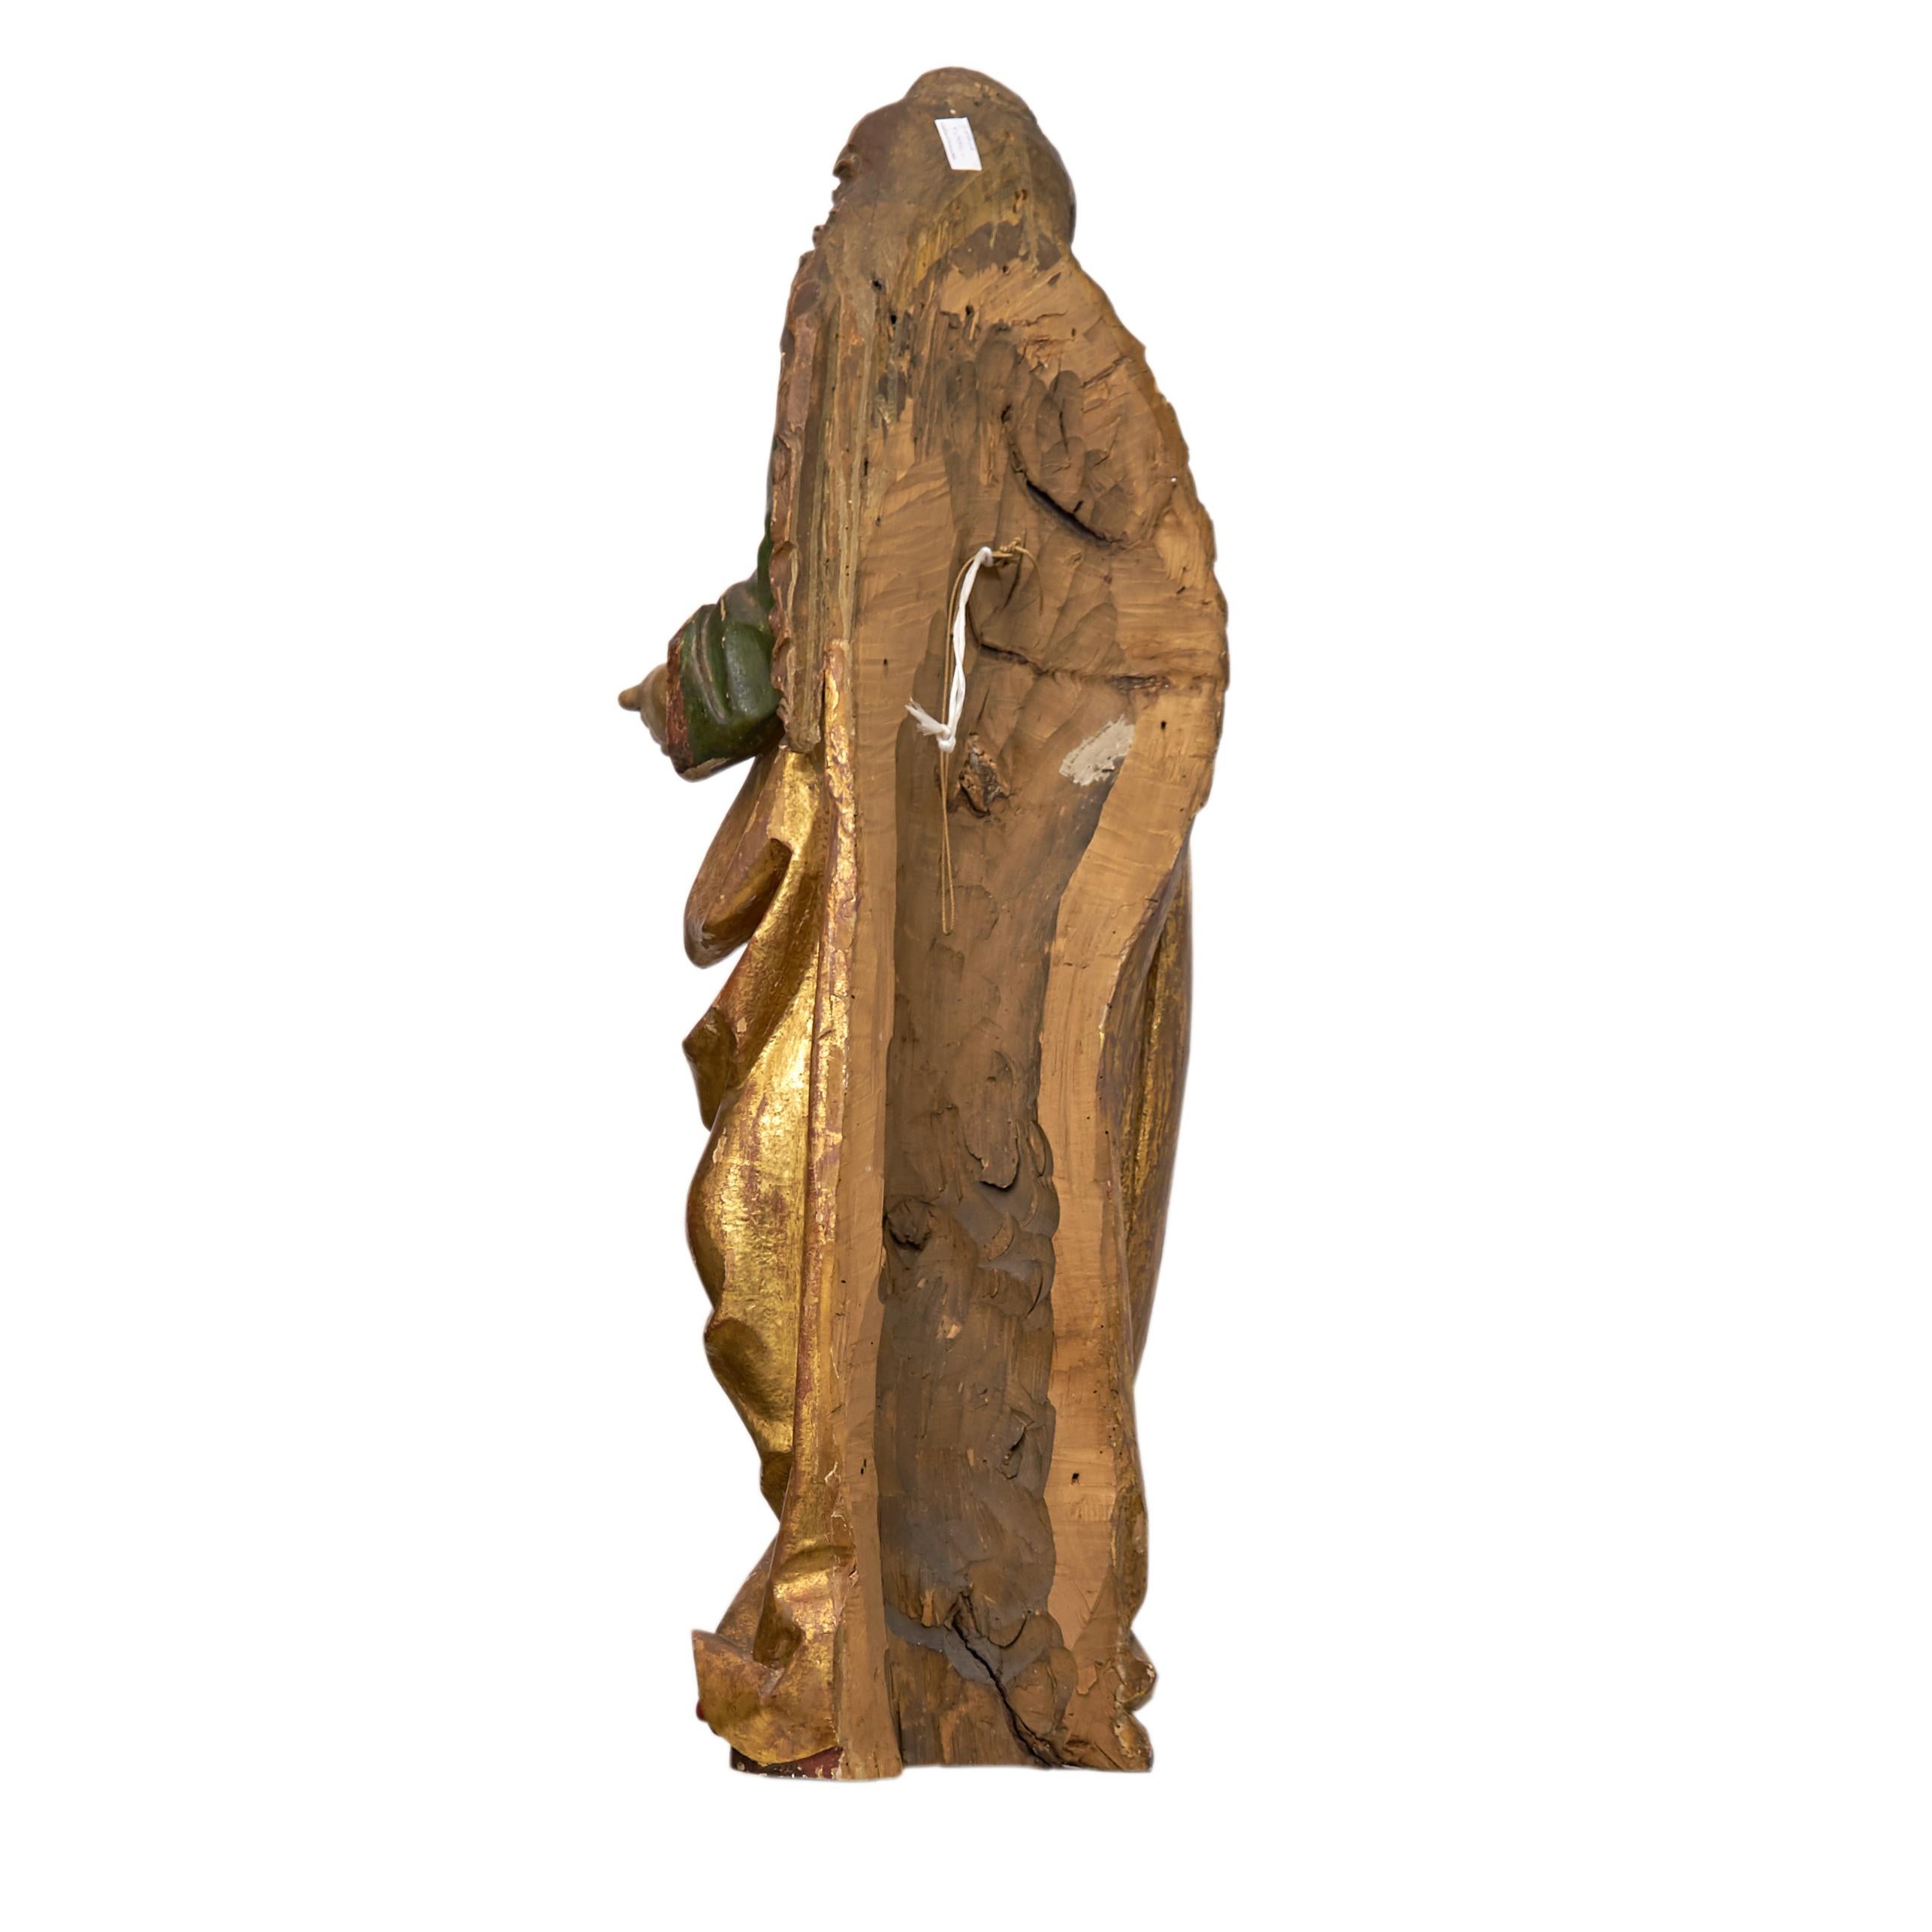 A Gothic polychrome and gilt limewood sculpture of a Saint with a book
(probably St.Anna ), circa 1500.
The Saint depicted standing in contrapost, with curly hair running over her shoulders, with very fine hands, wearing an elaborately draped